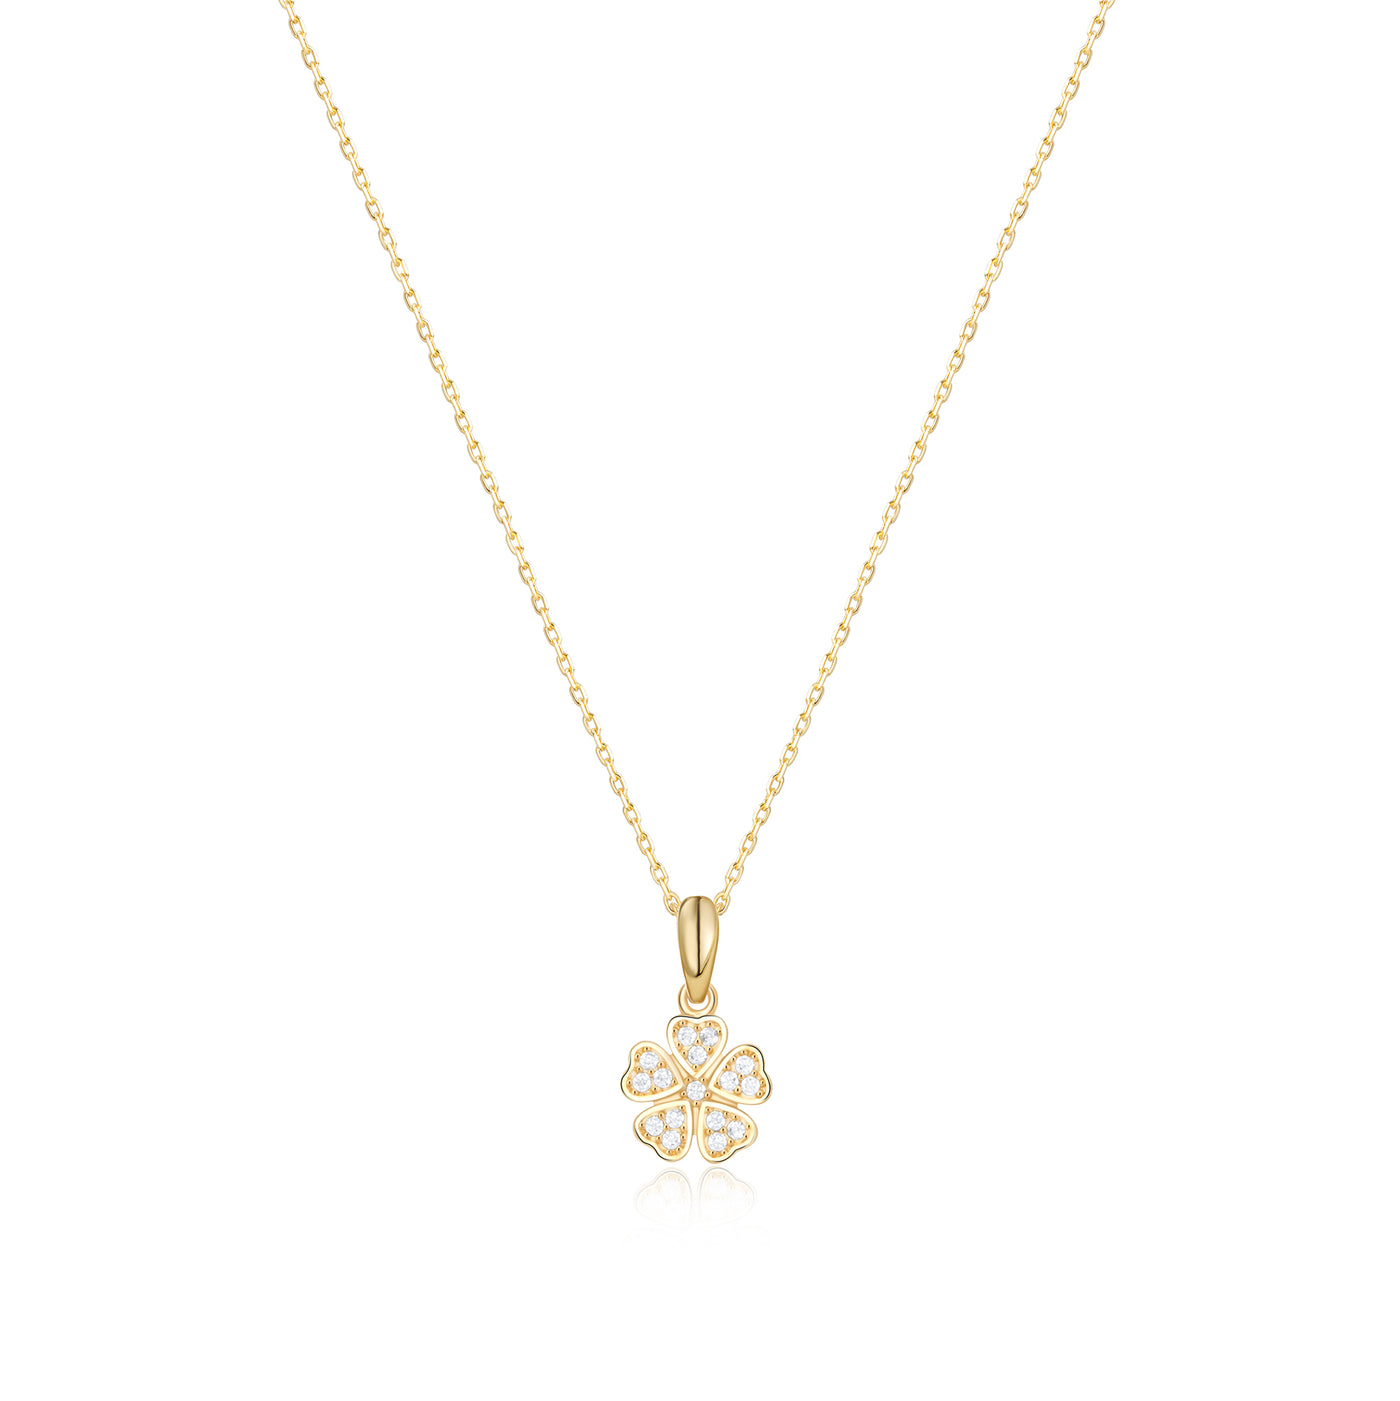 Clover with Diamonds Necklace- Silver, 8K or 14K